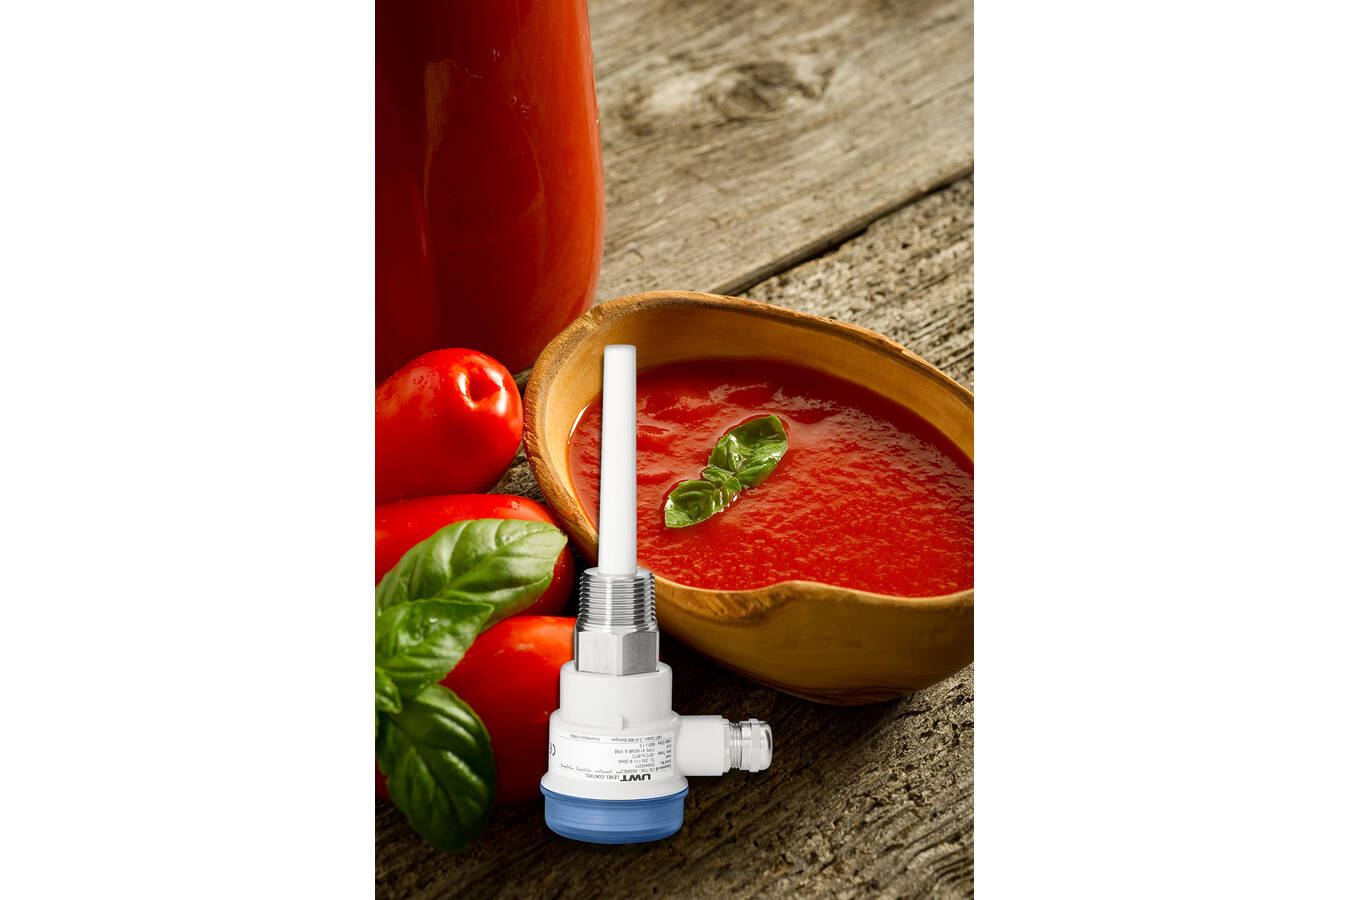 Capacitance level measurement with Capanivo in tomato paste production Precise media detection with two wire electronics and “Tip sensitivity”
Tomatoes